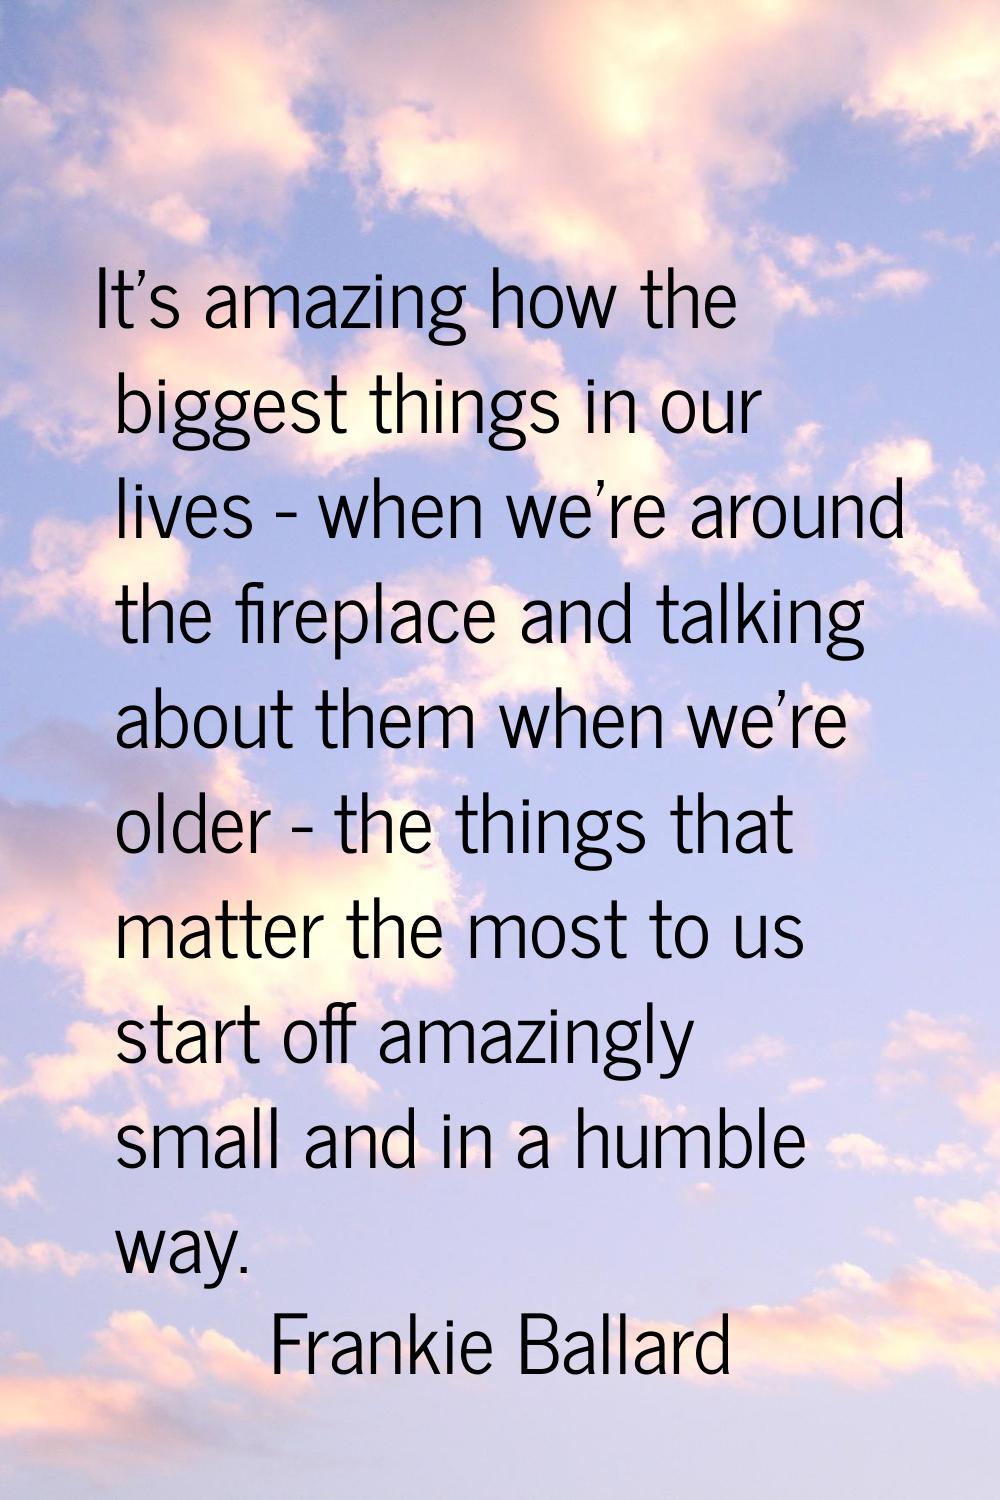 It's amazing how the biggest things in our lives - when we're around the fireplace and talking abou